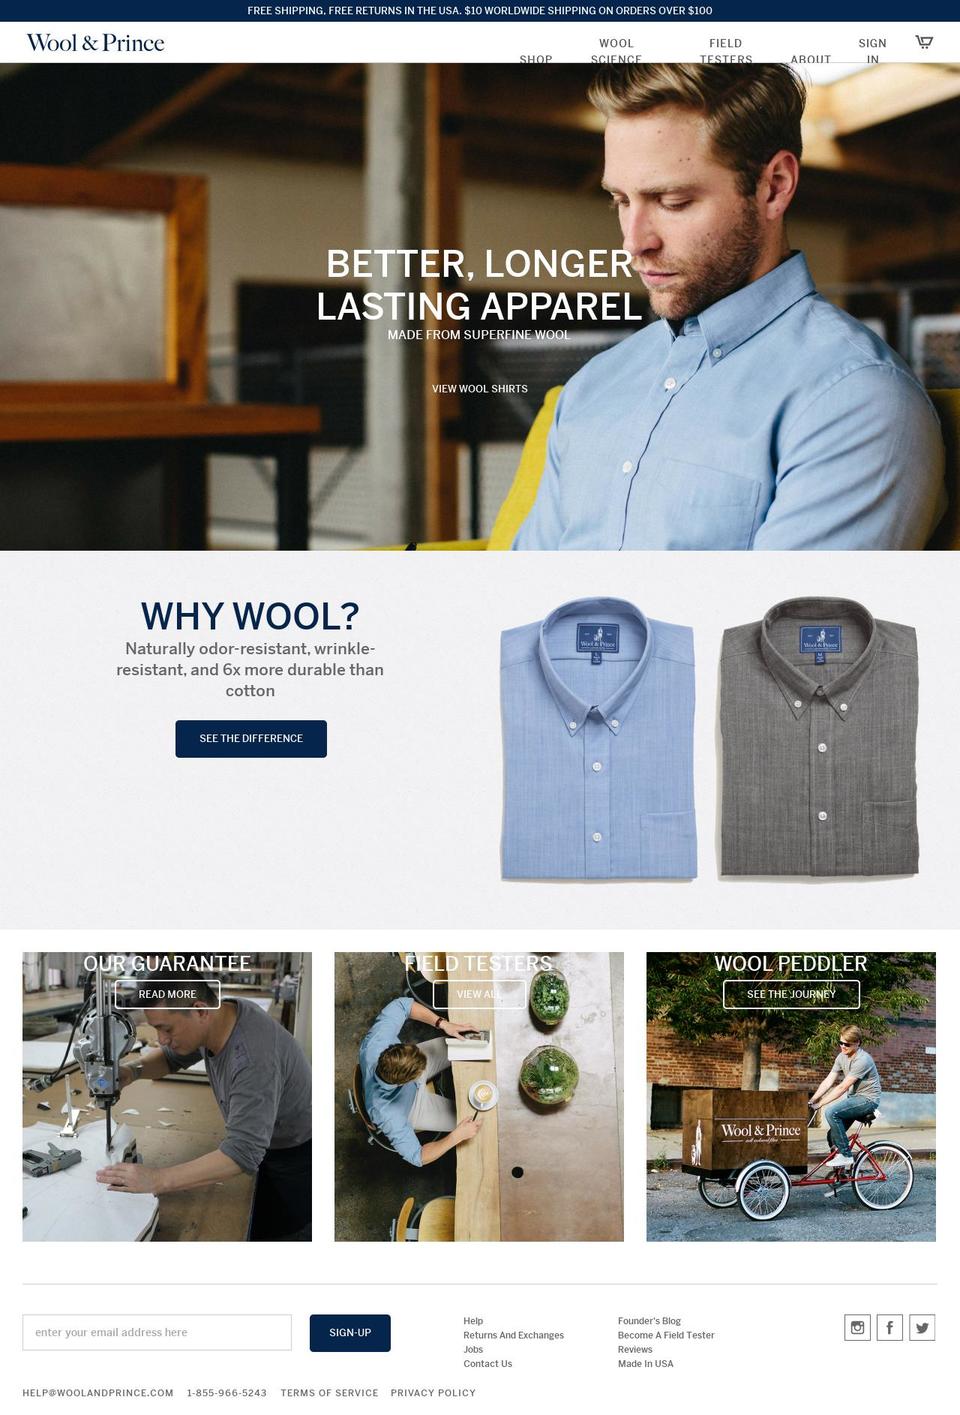 Production Shopify theme site example woolandprince.com